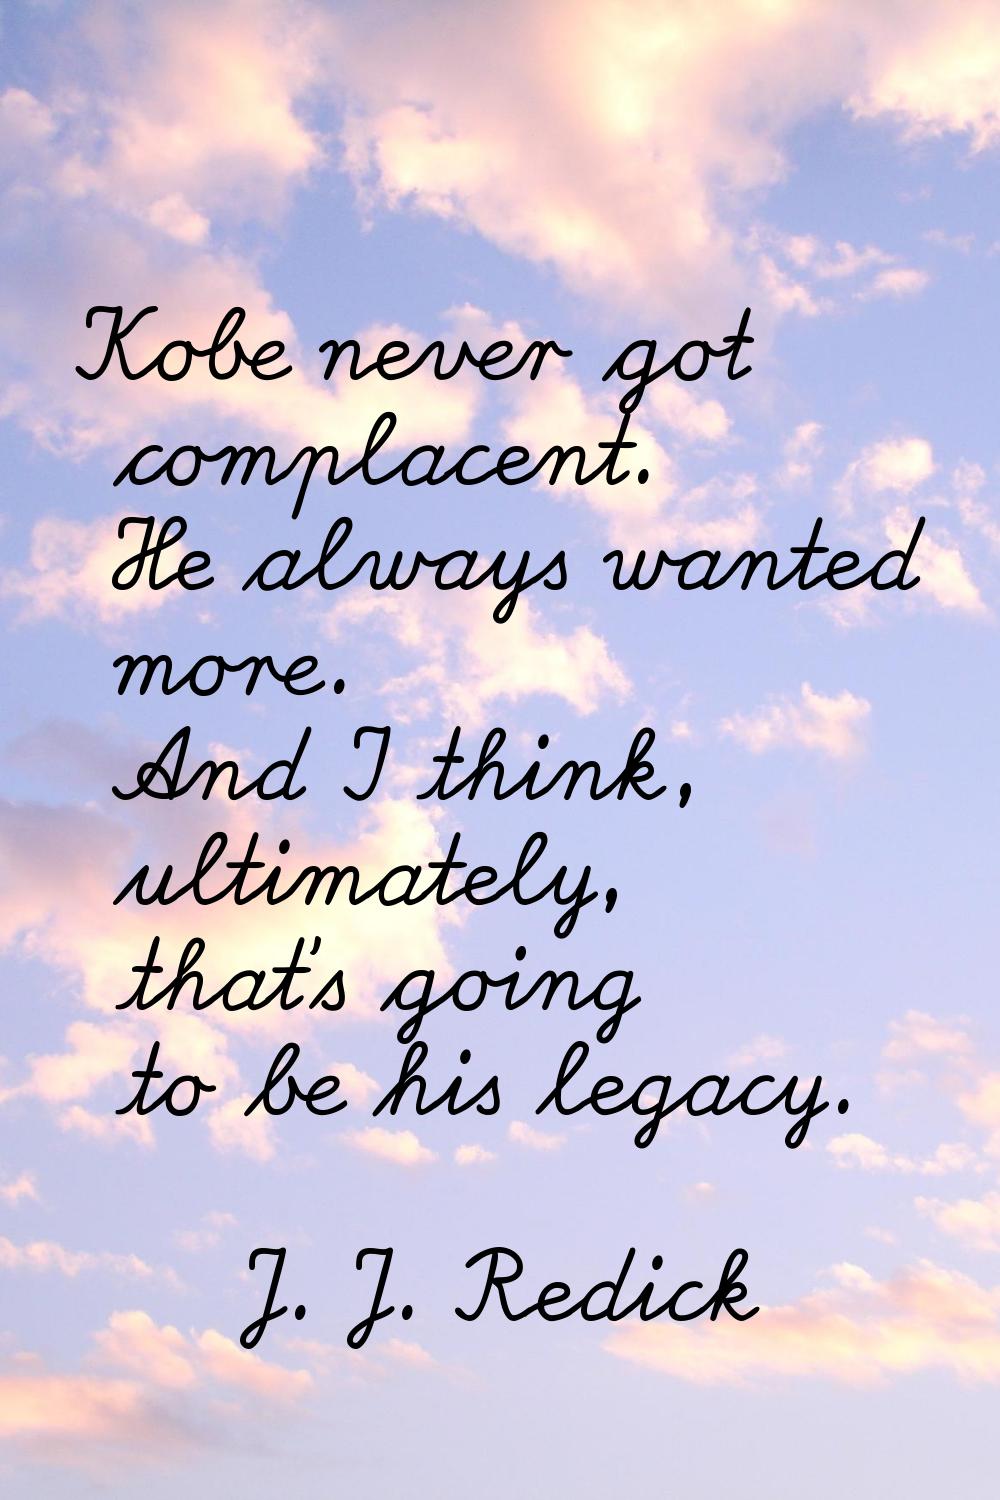 Kobe never got complacent. He always wanted more. And I think, ultimately, that's going to be his l